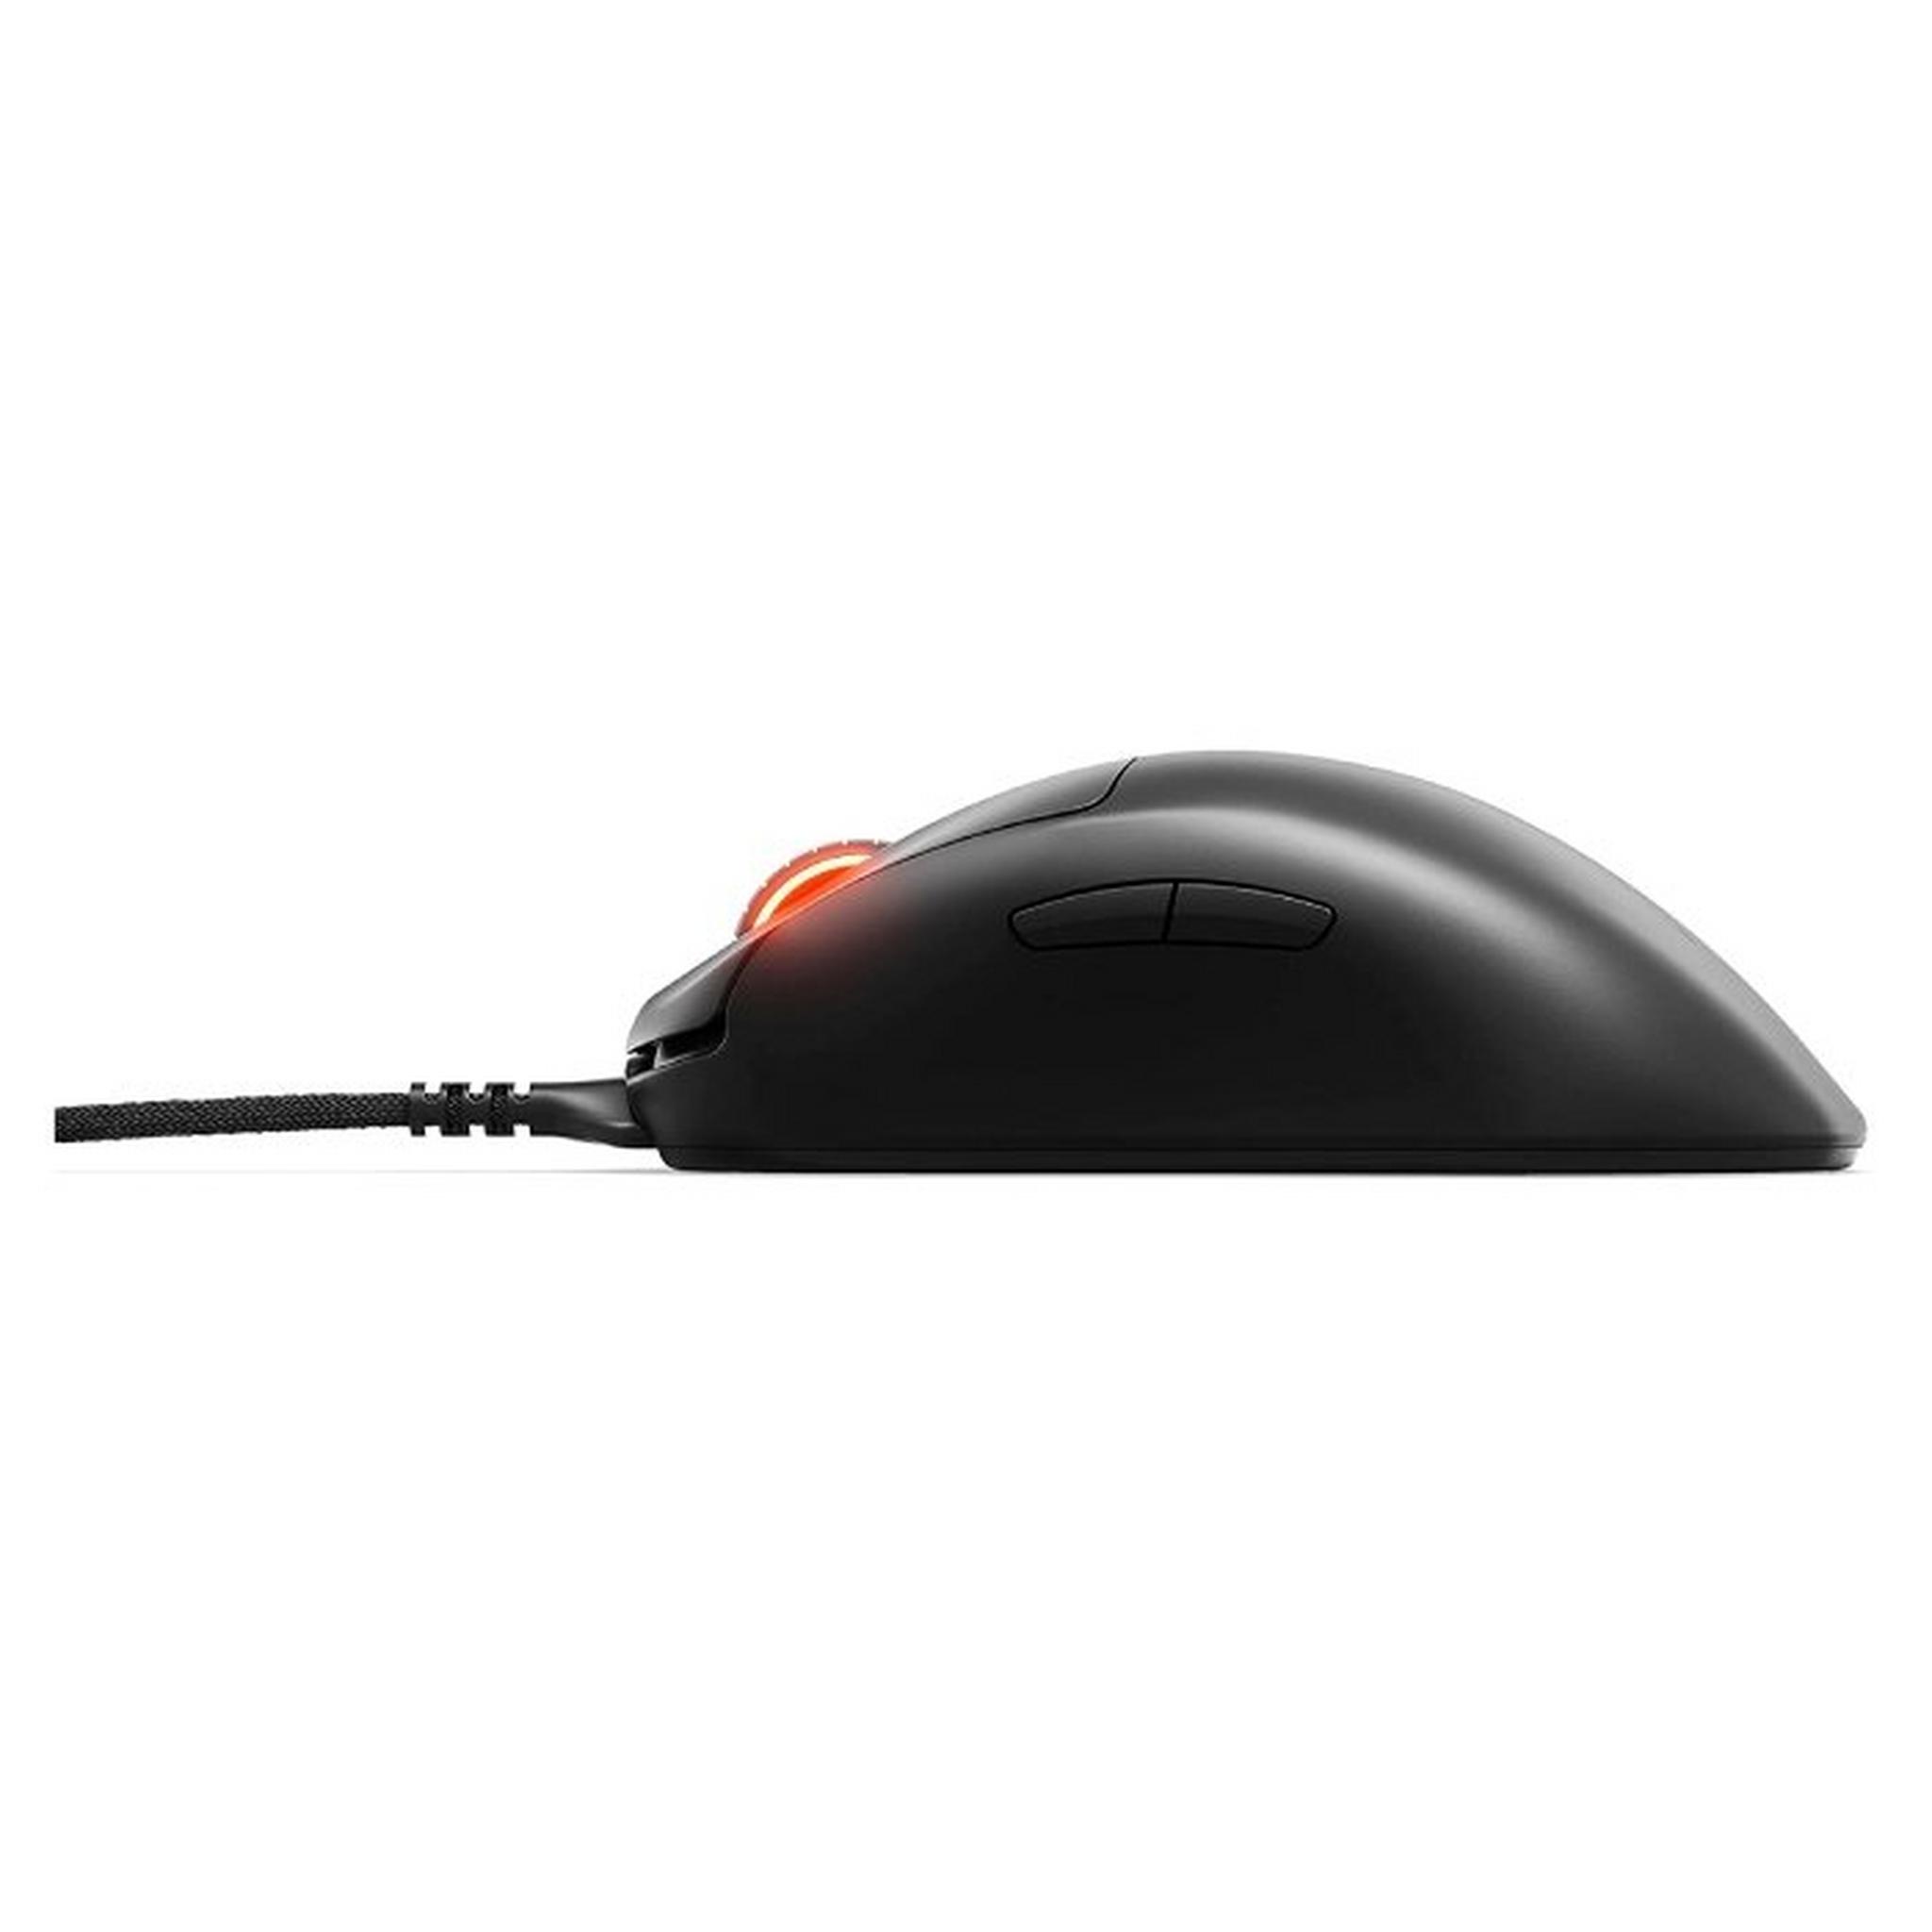 Steelseries Prime Gaming Mouse